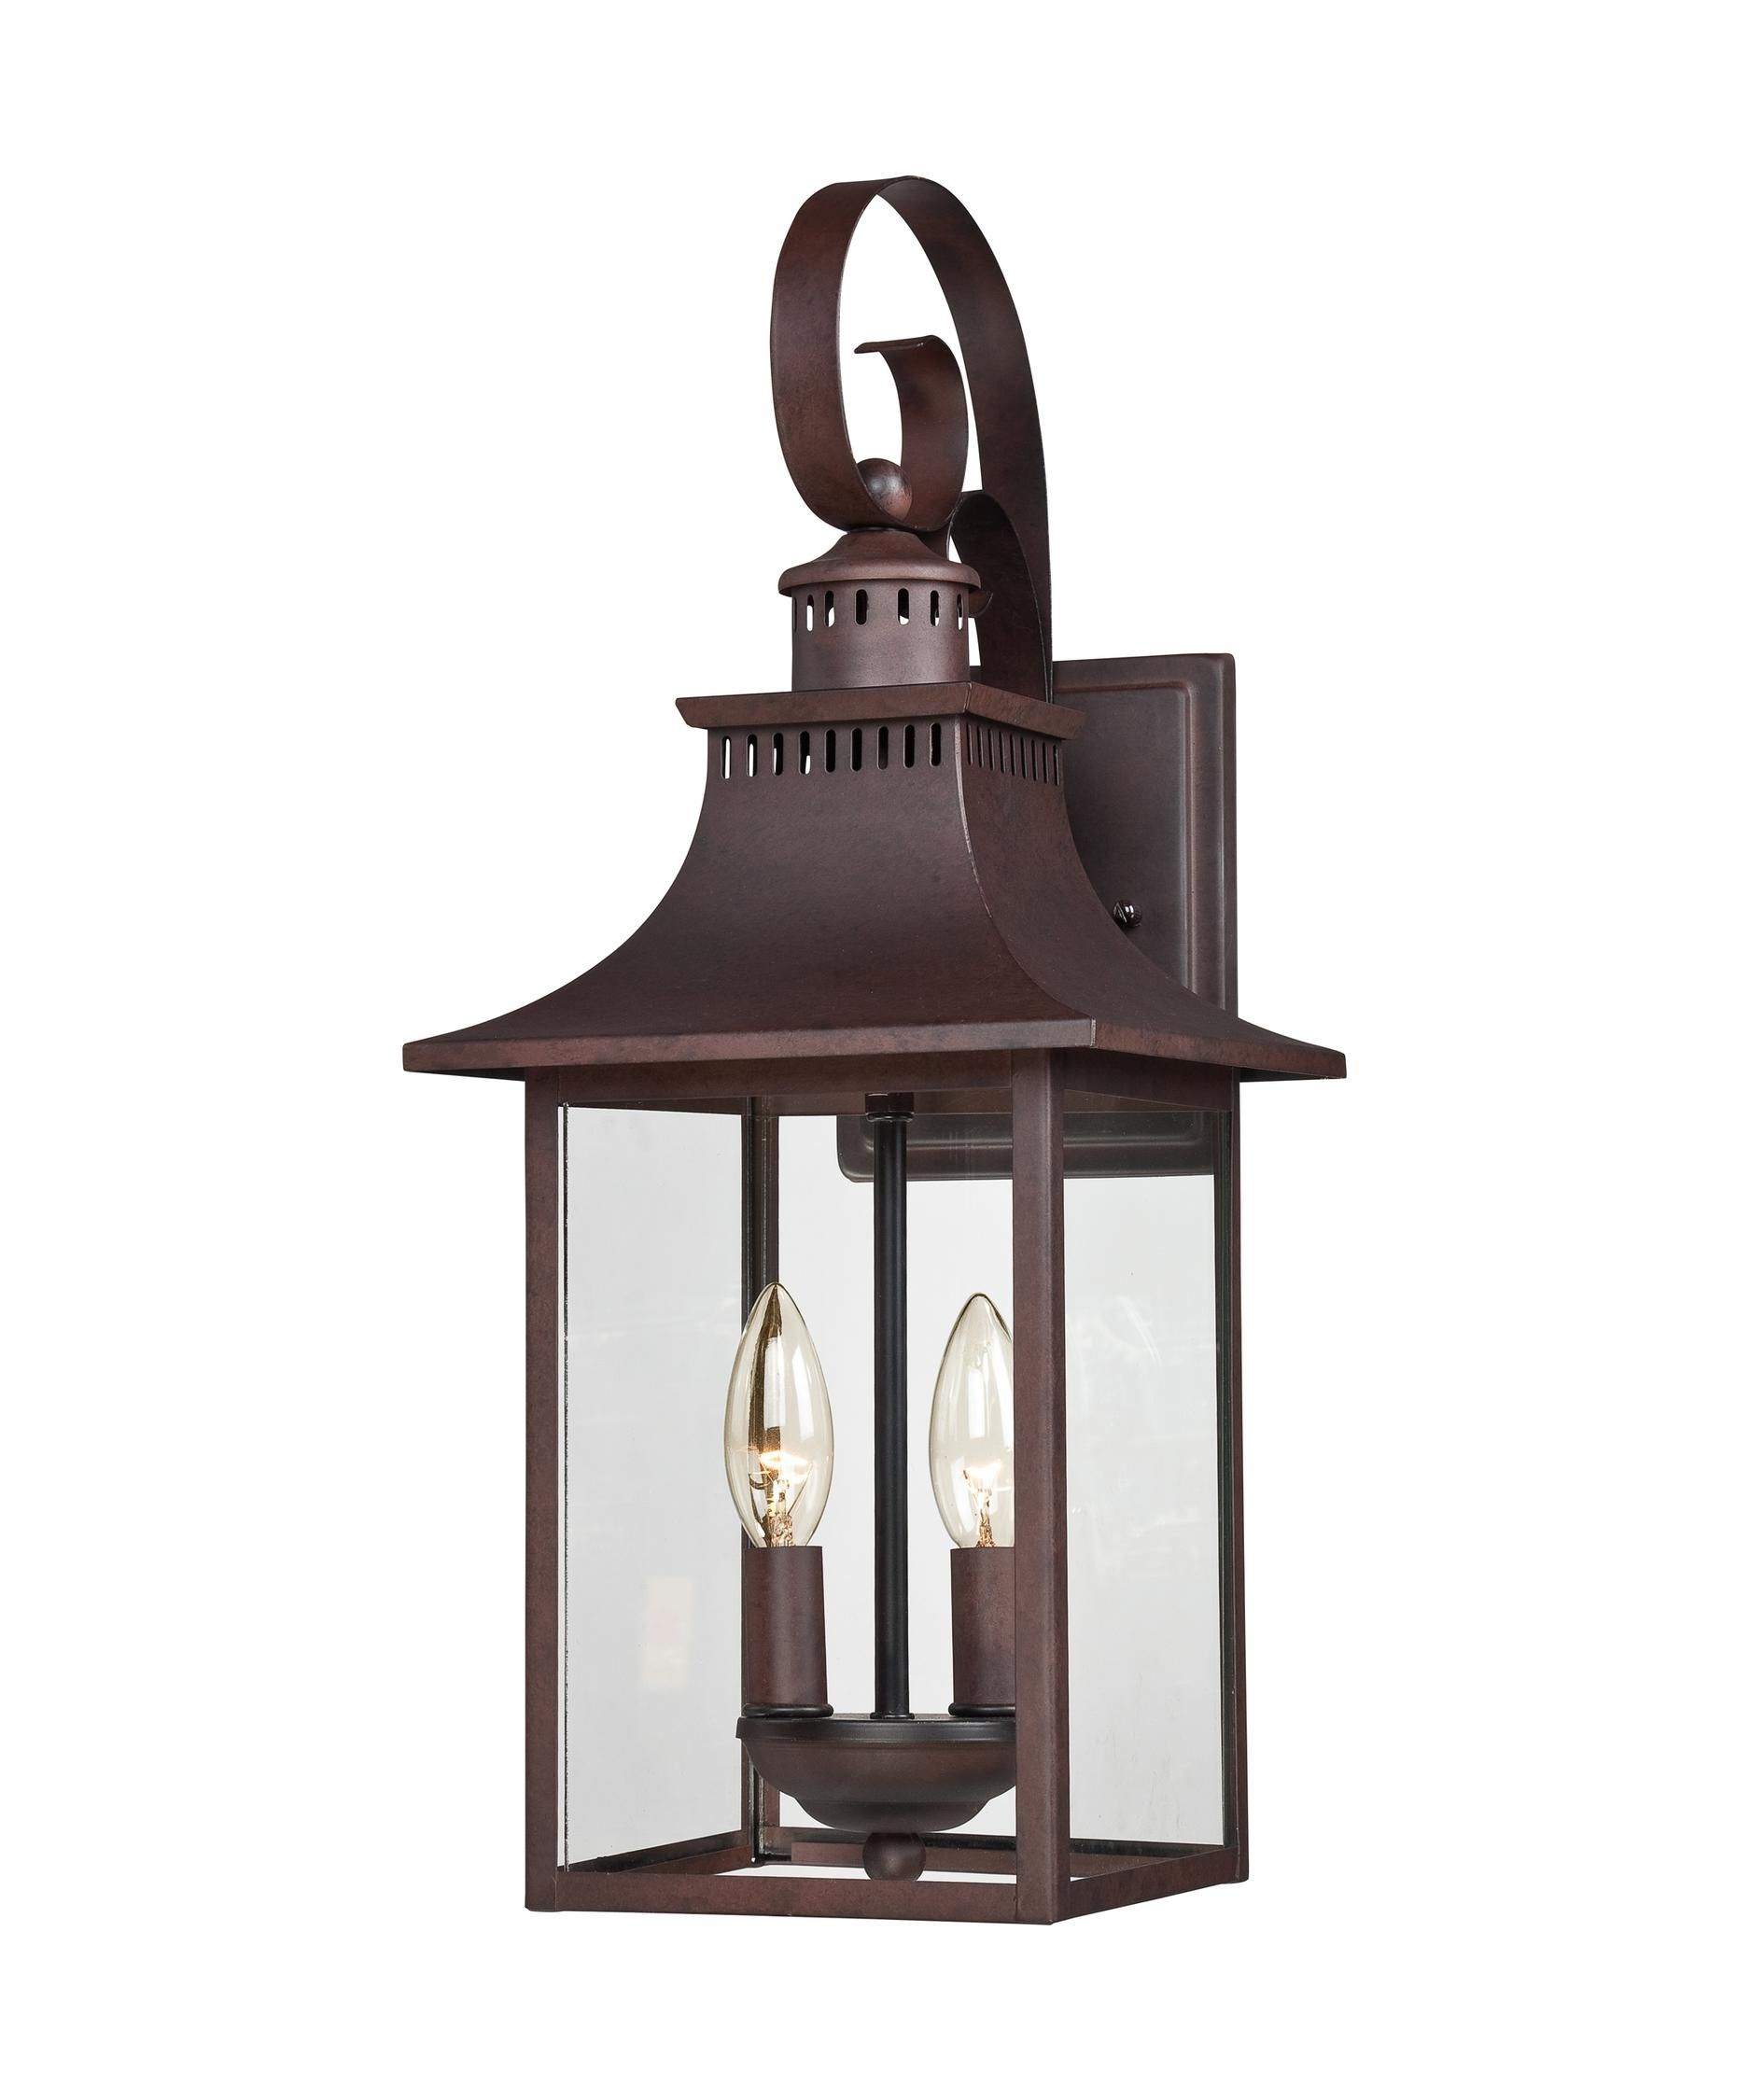 Quoizel Ccr8408 Chancellor 8 Inch Wide 2 Light Outdoor Wall Light Intended For Copper Outdoor Lanterns (View 14 of 20)